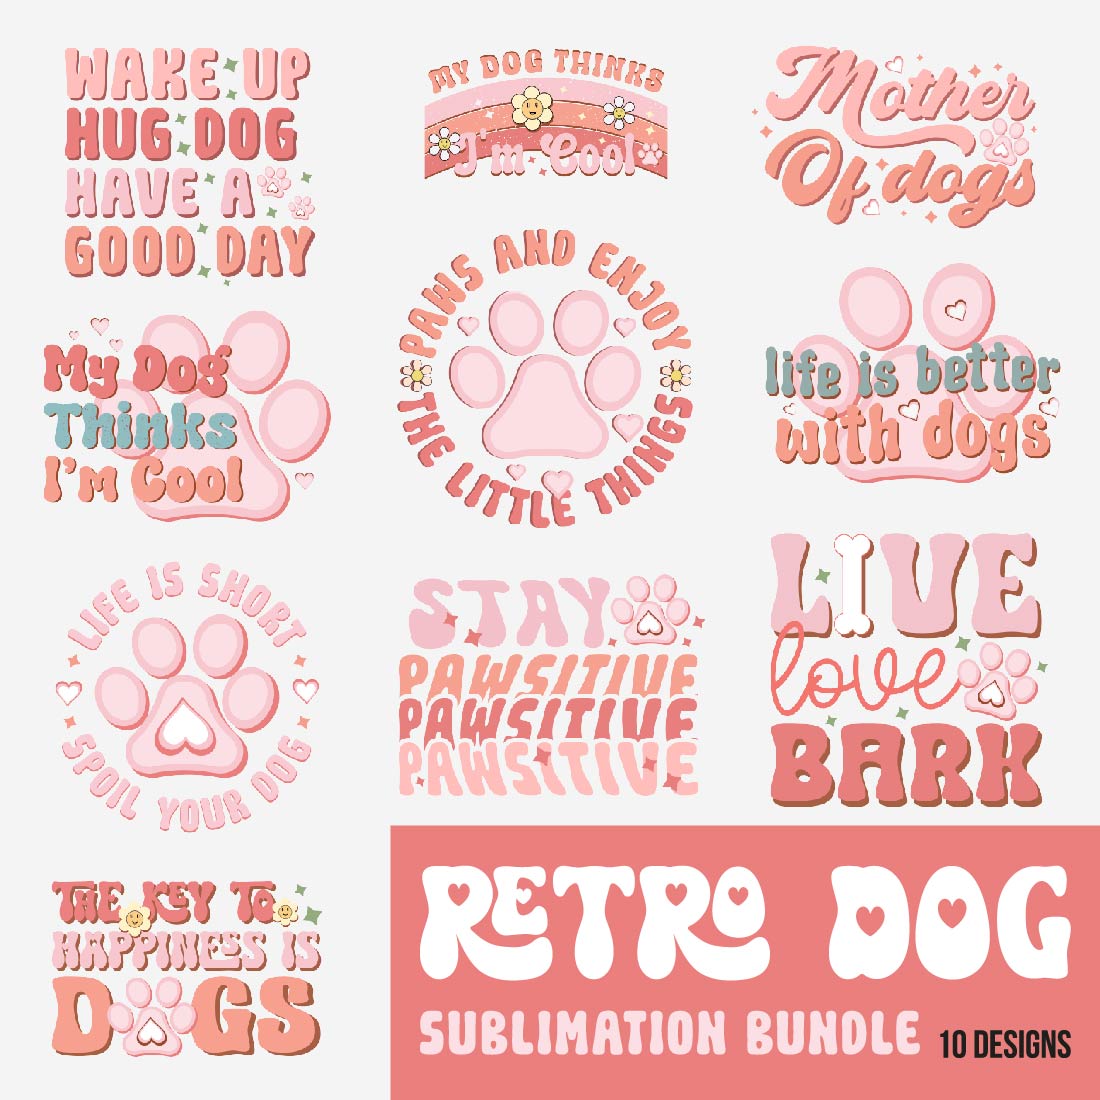 Set of pink stickers with different designs.